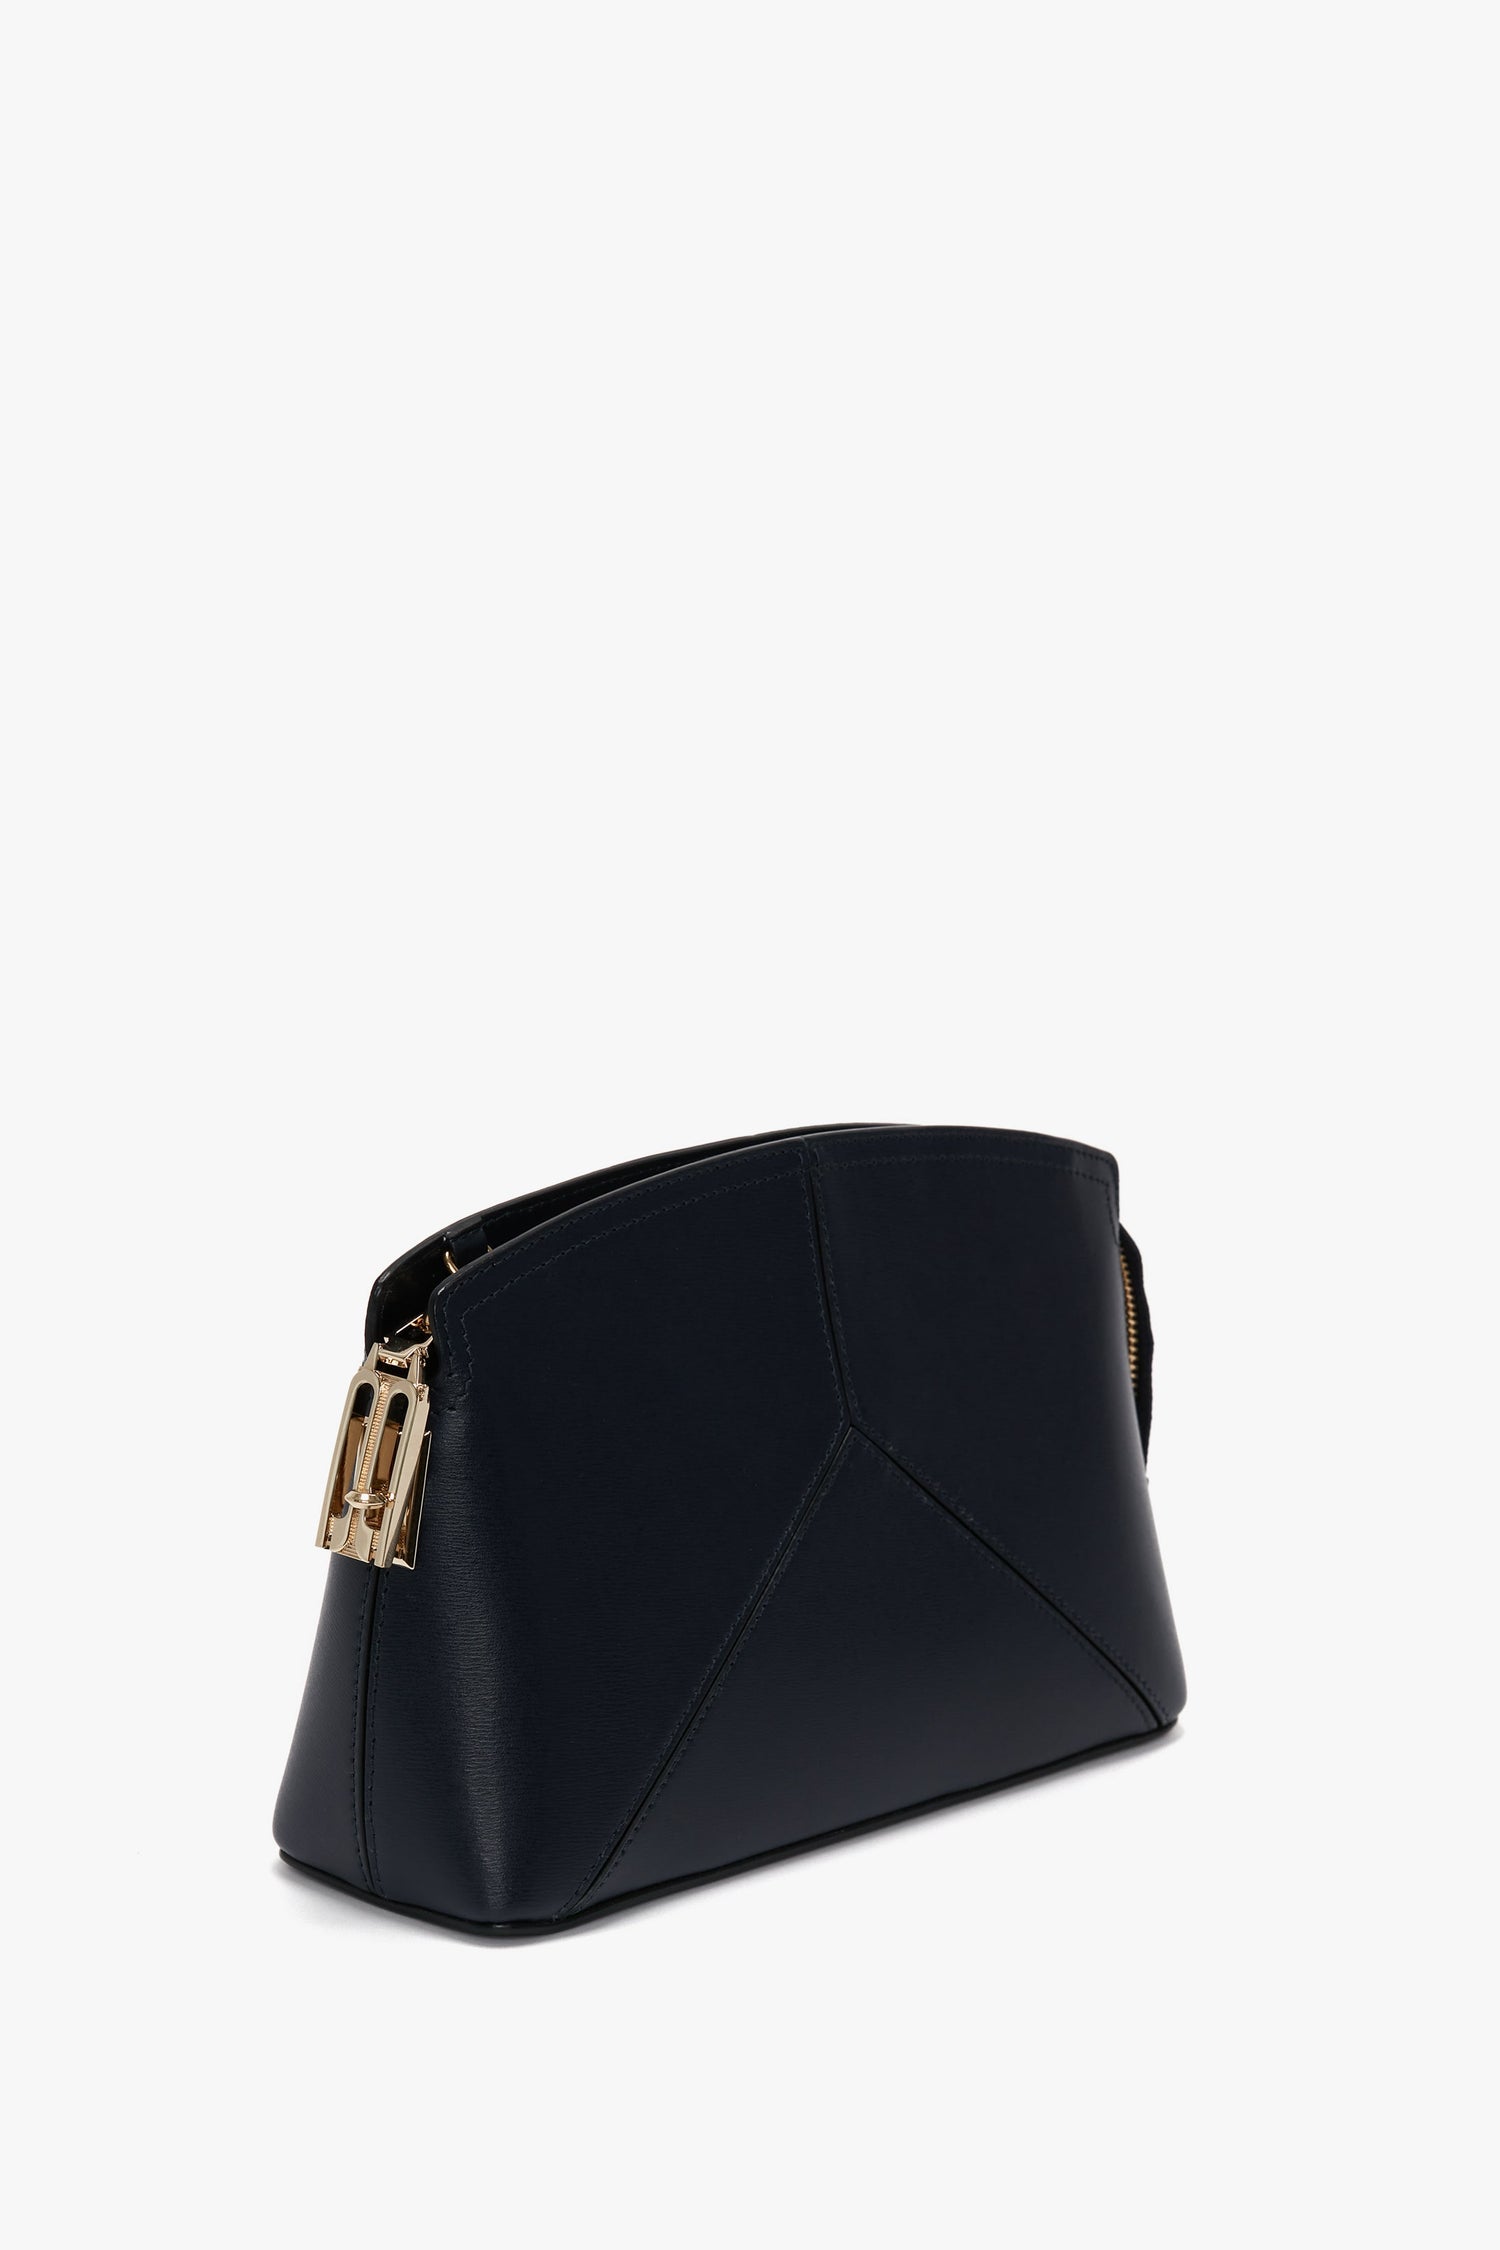 A Victoria Beckham Exclusive Victoria Crossbody Bag In Navy Leather, featuring a structured design and geometric stitching details.